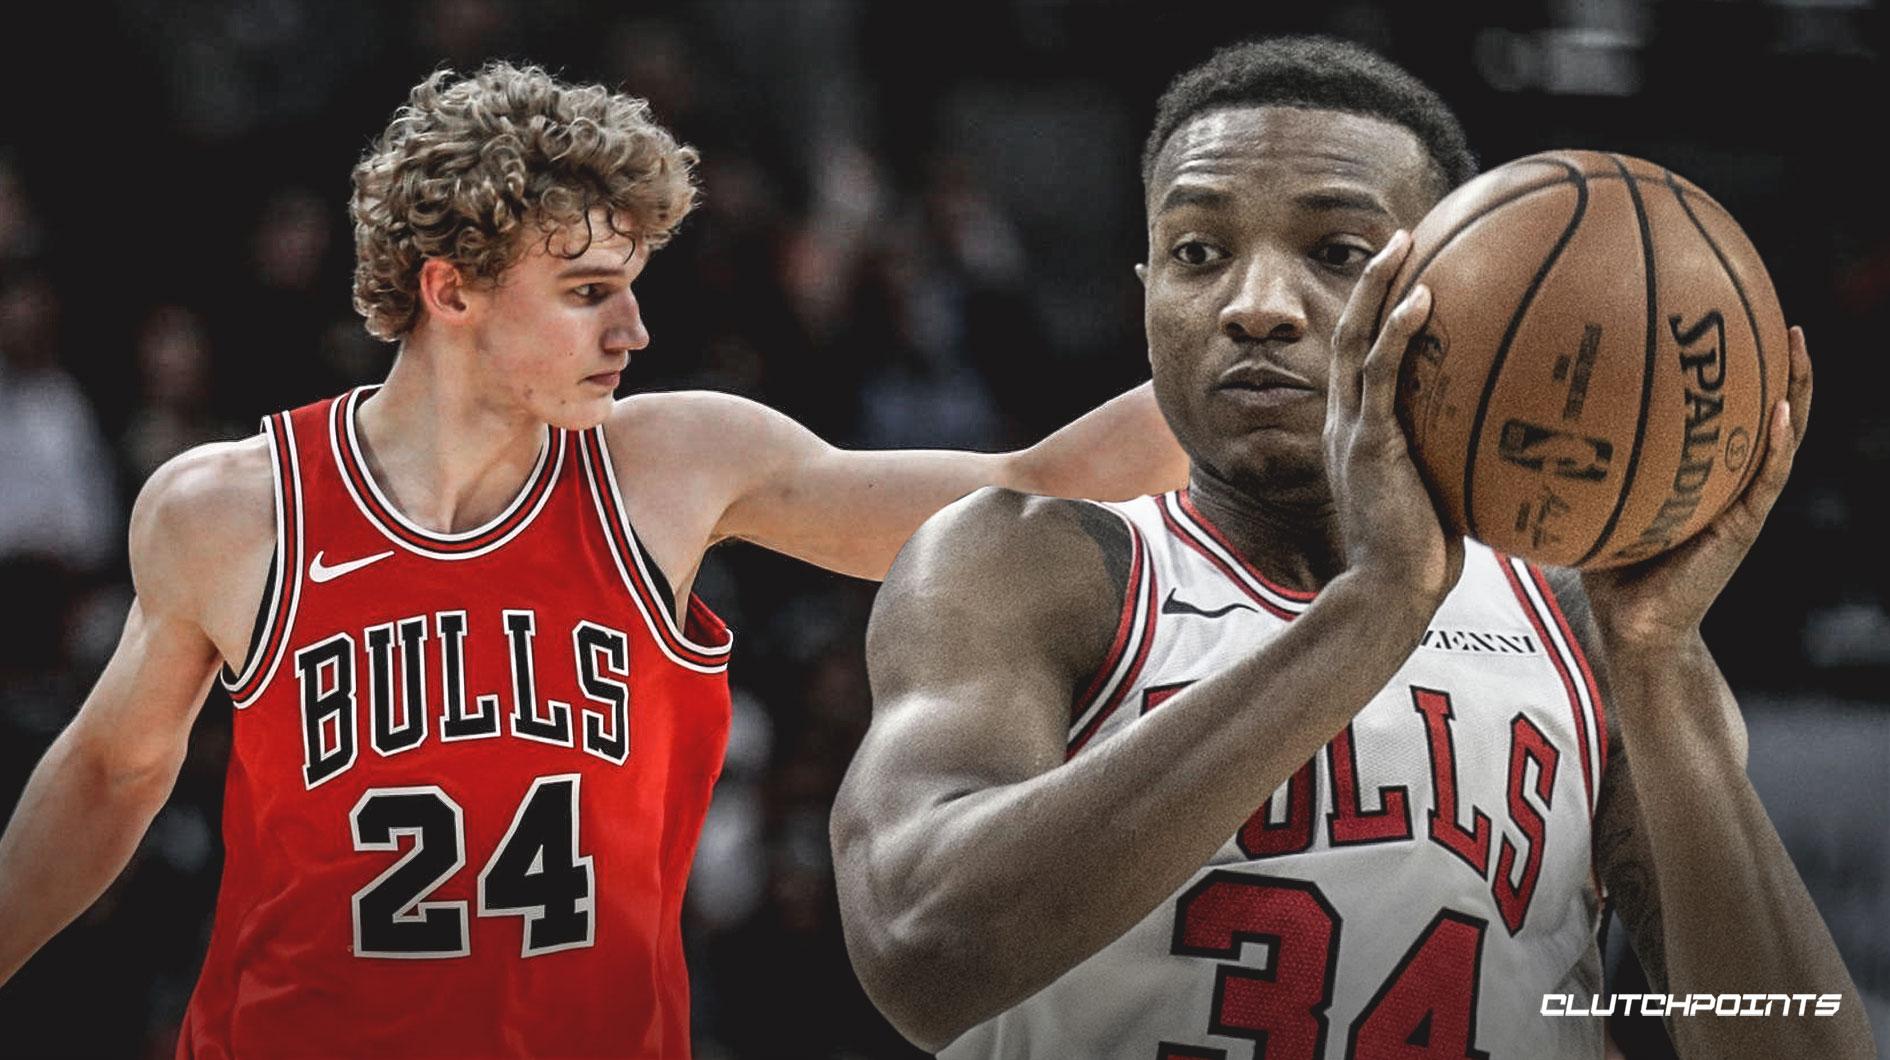 Flipboard: Bulls will listen on offers for anyone other than Lauri